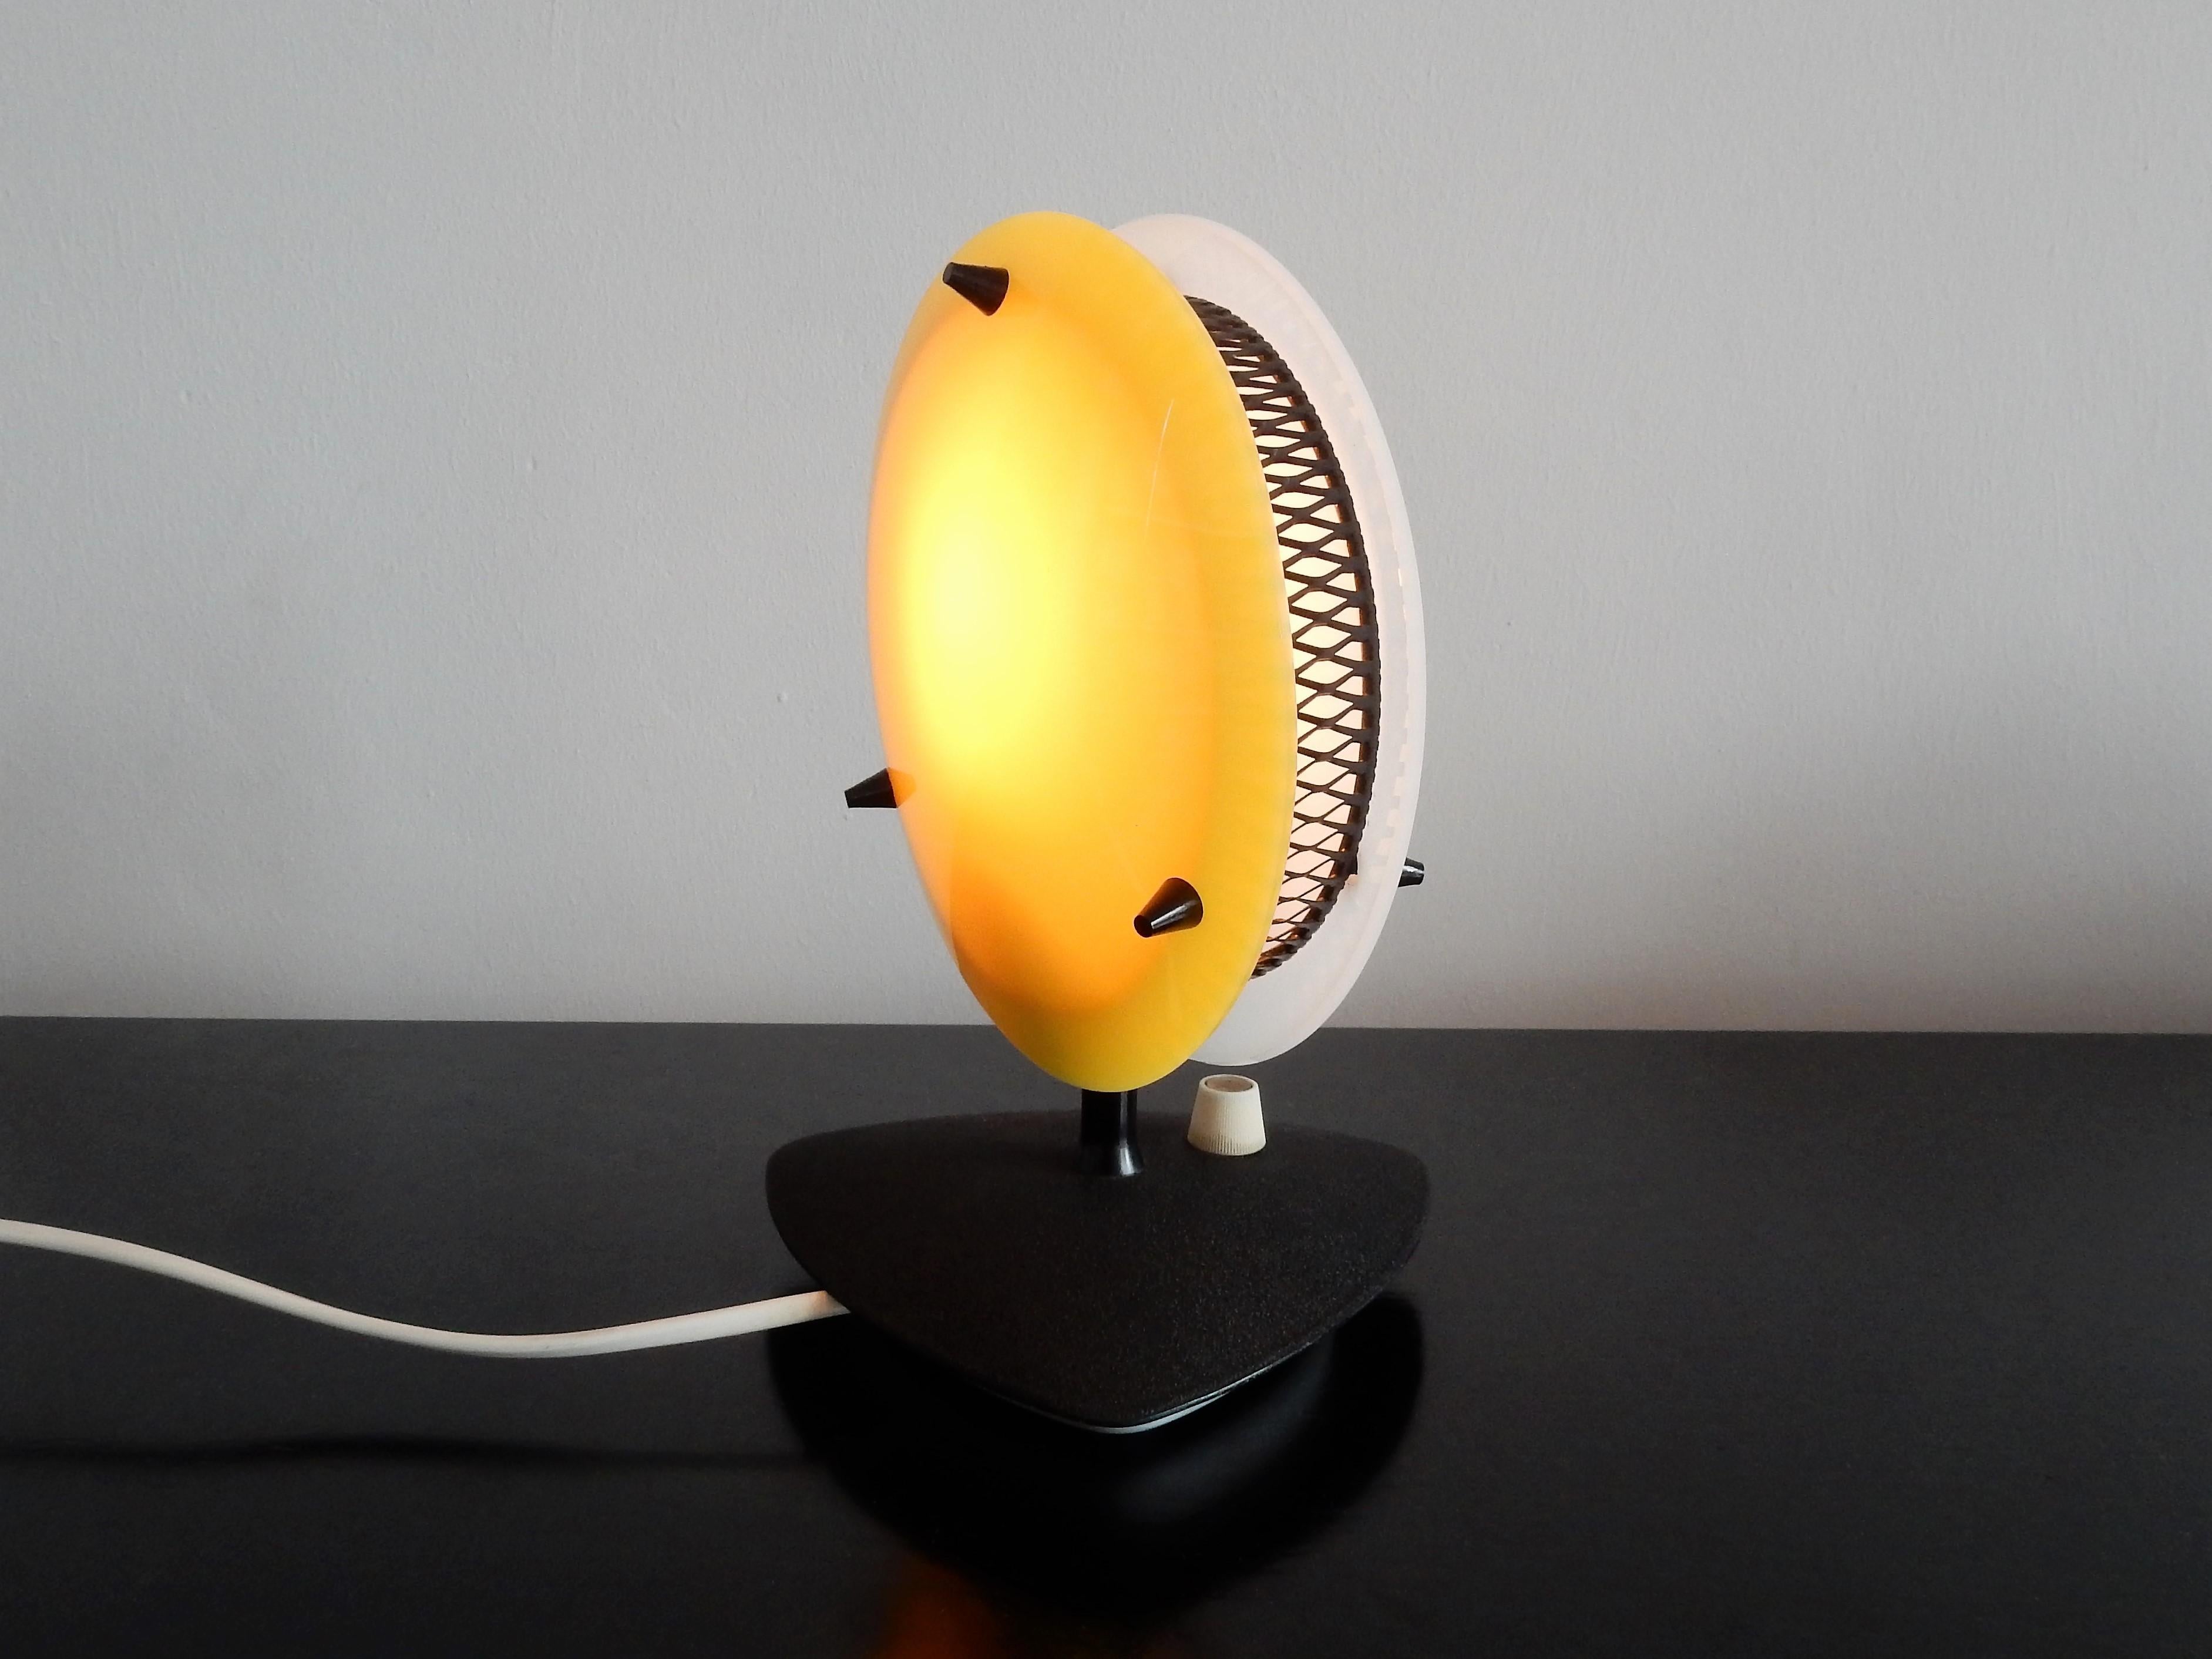 Mid-20th Century Dimmable Sonnenkind Table Lamp for Télé-ambiance, France 1950s-1960s For Sale